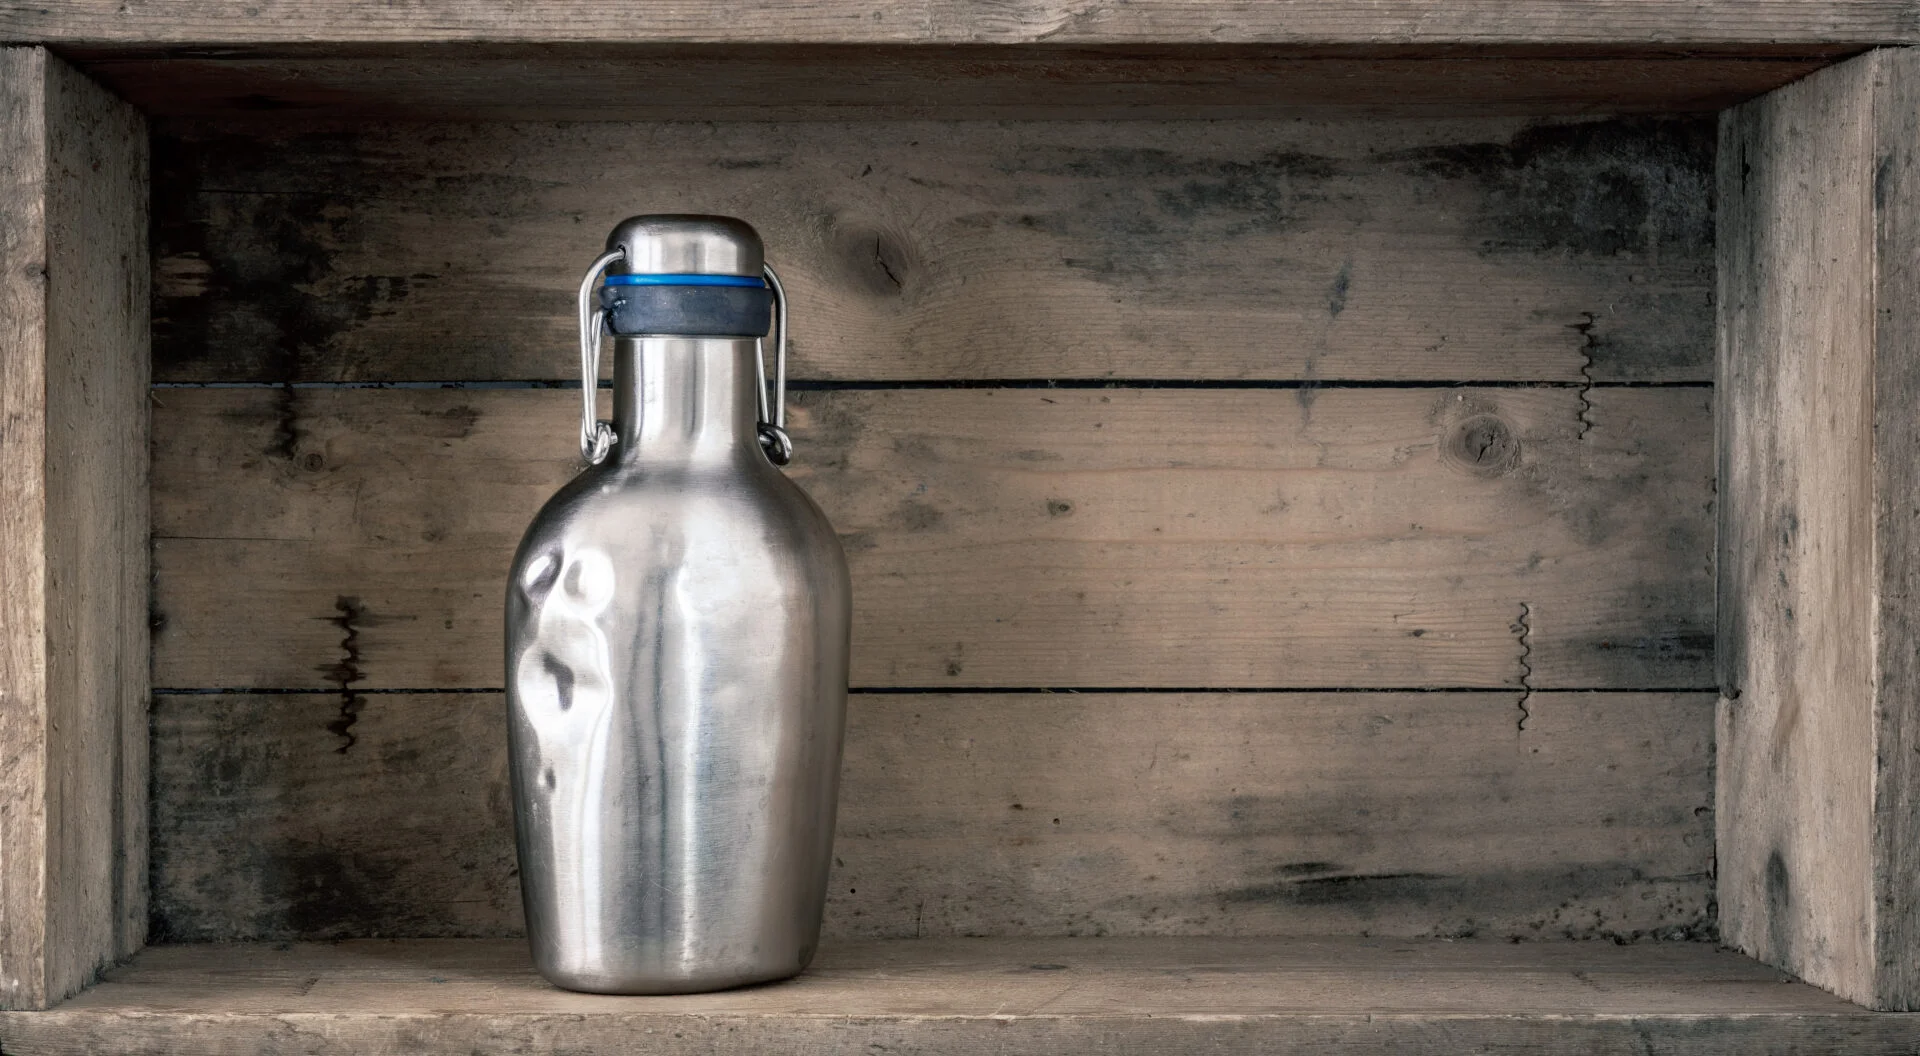 An image of an old dented metal bottle on wooden background